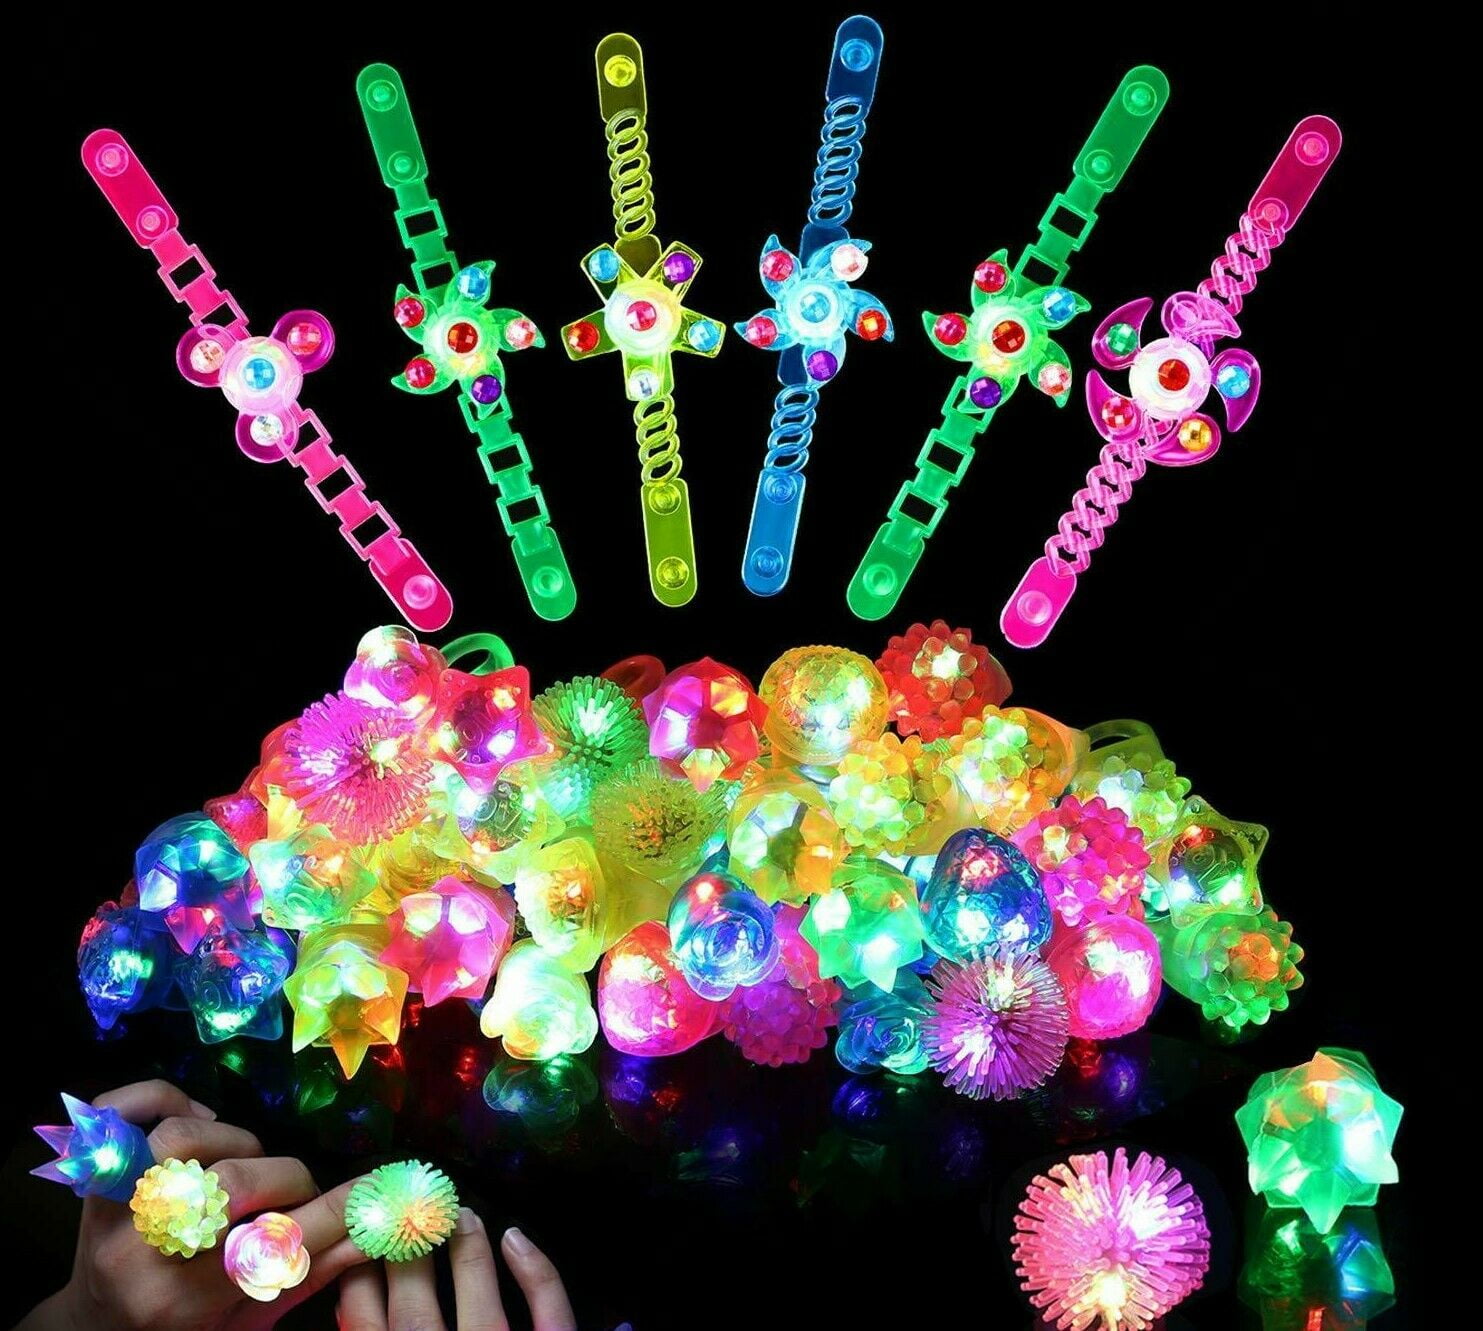 Light up Rings LED Party Favors for Kids Prizes 20 Pack Glow in the Dark Party Supplies Bulk Hand Spin Stress Relief Anxiety Toys for Classroom Birthday Celebration  for kids 